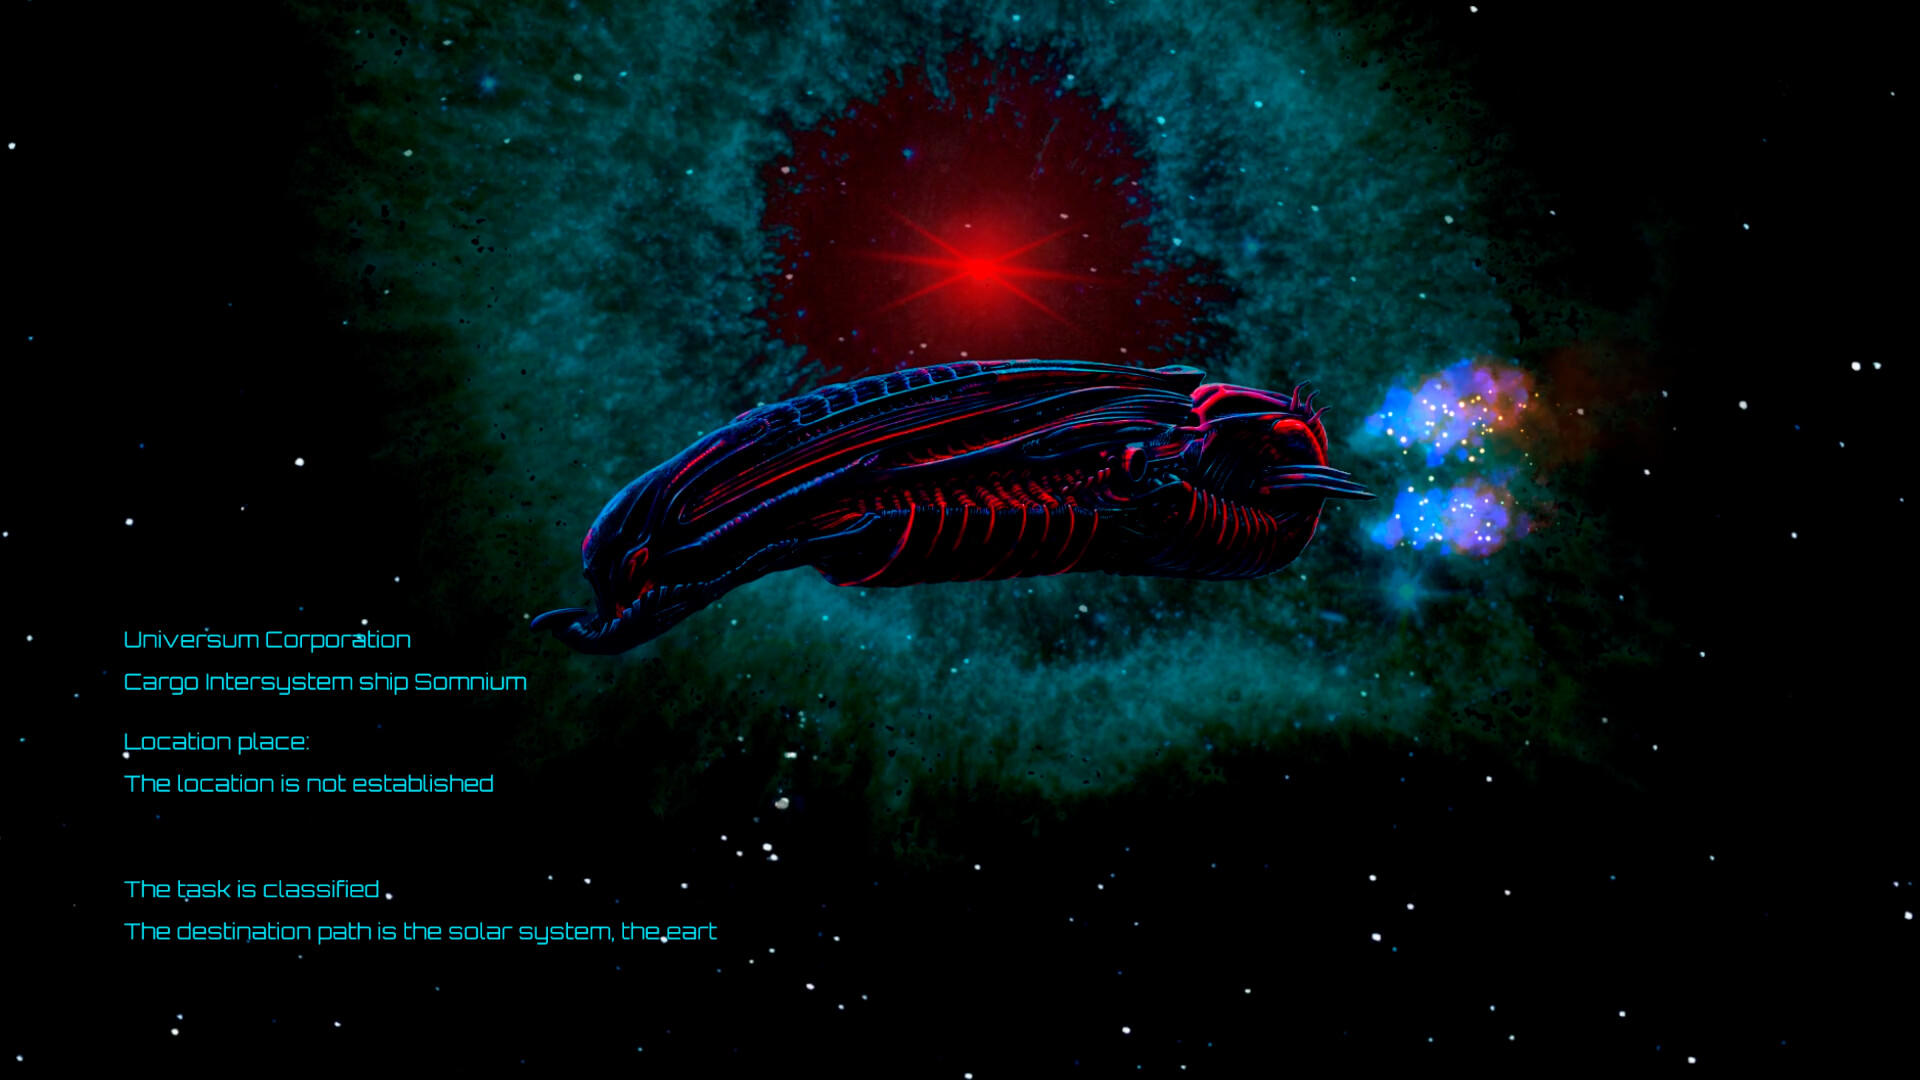 Lost in Space screenshot game